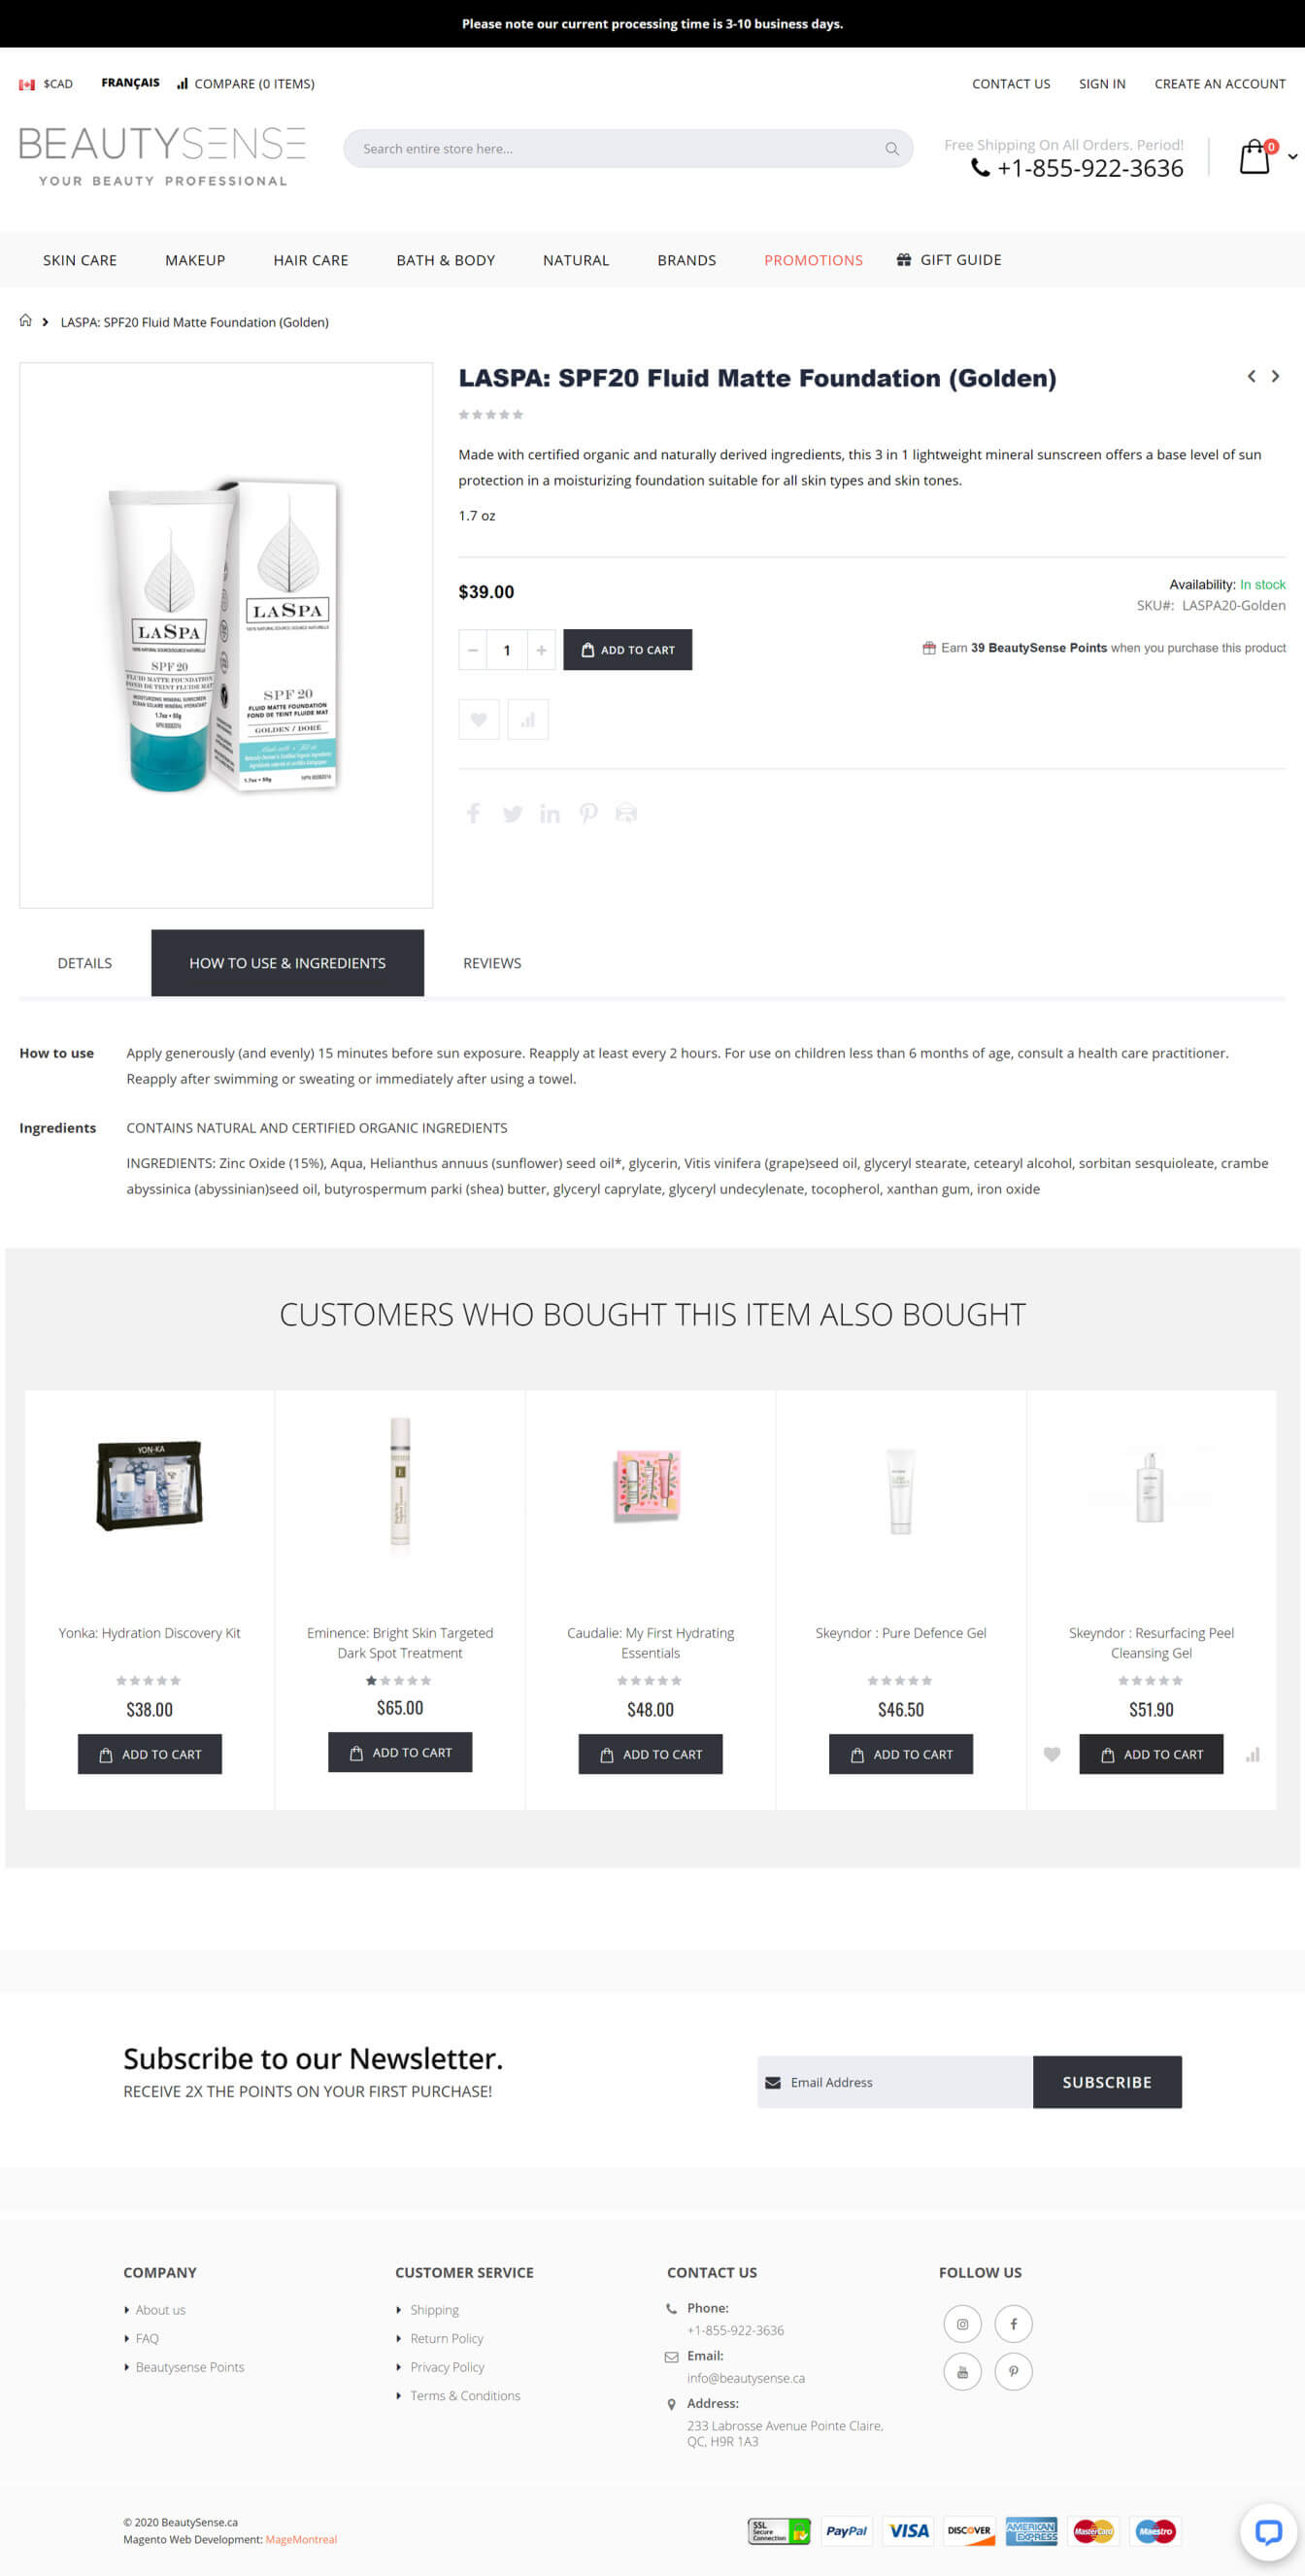 Beautysense Product Details page image